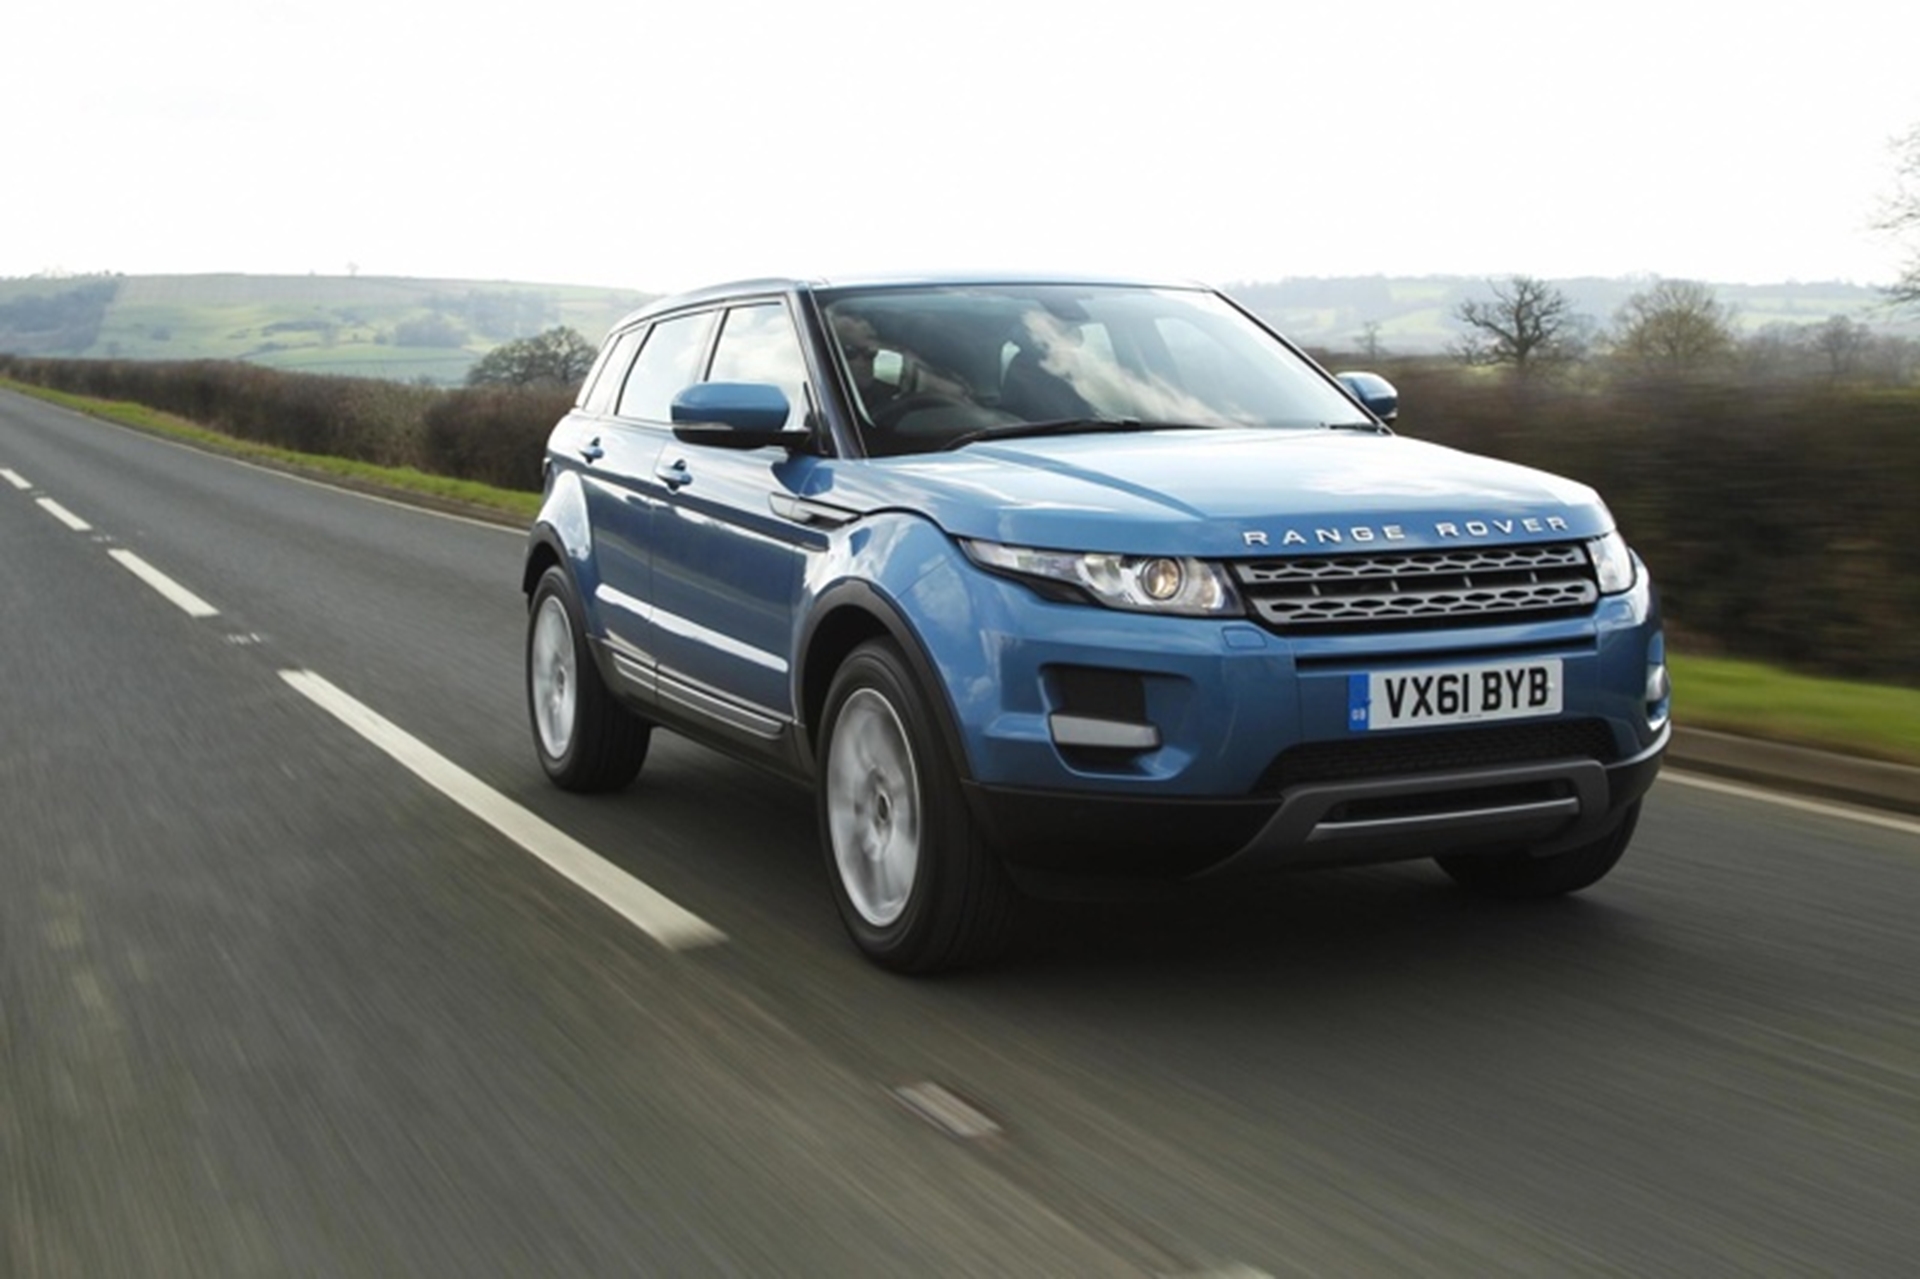 JLR COMMITS EXTRA £1 BILLION TO UK SUPPLIERS – AND CREATES 300 JOBS